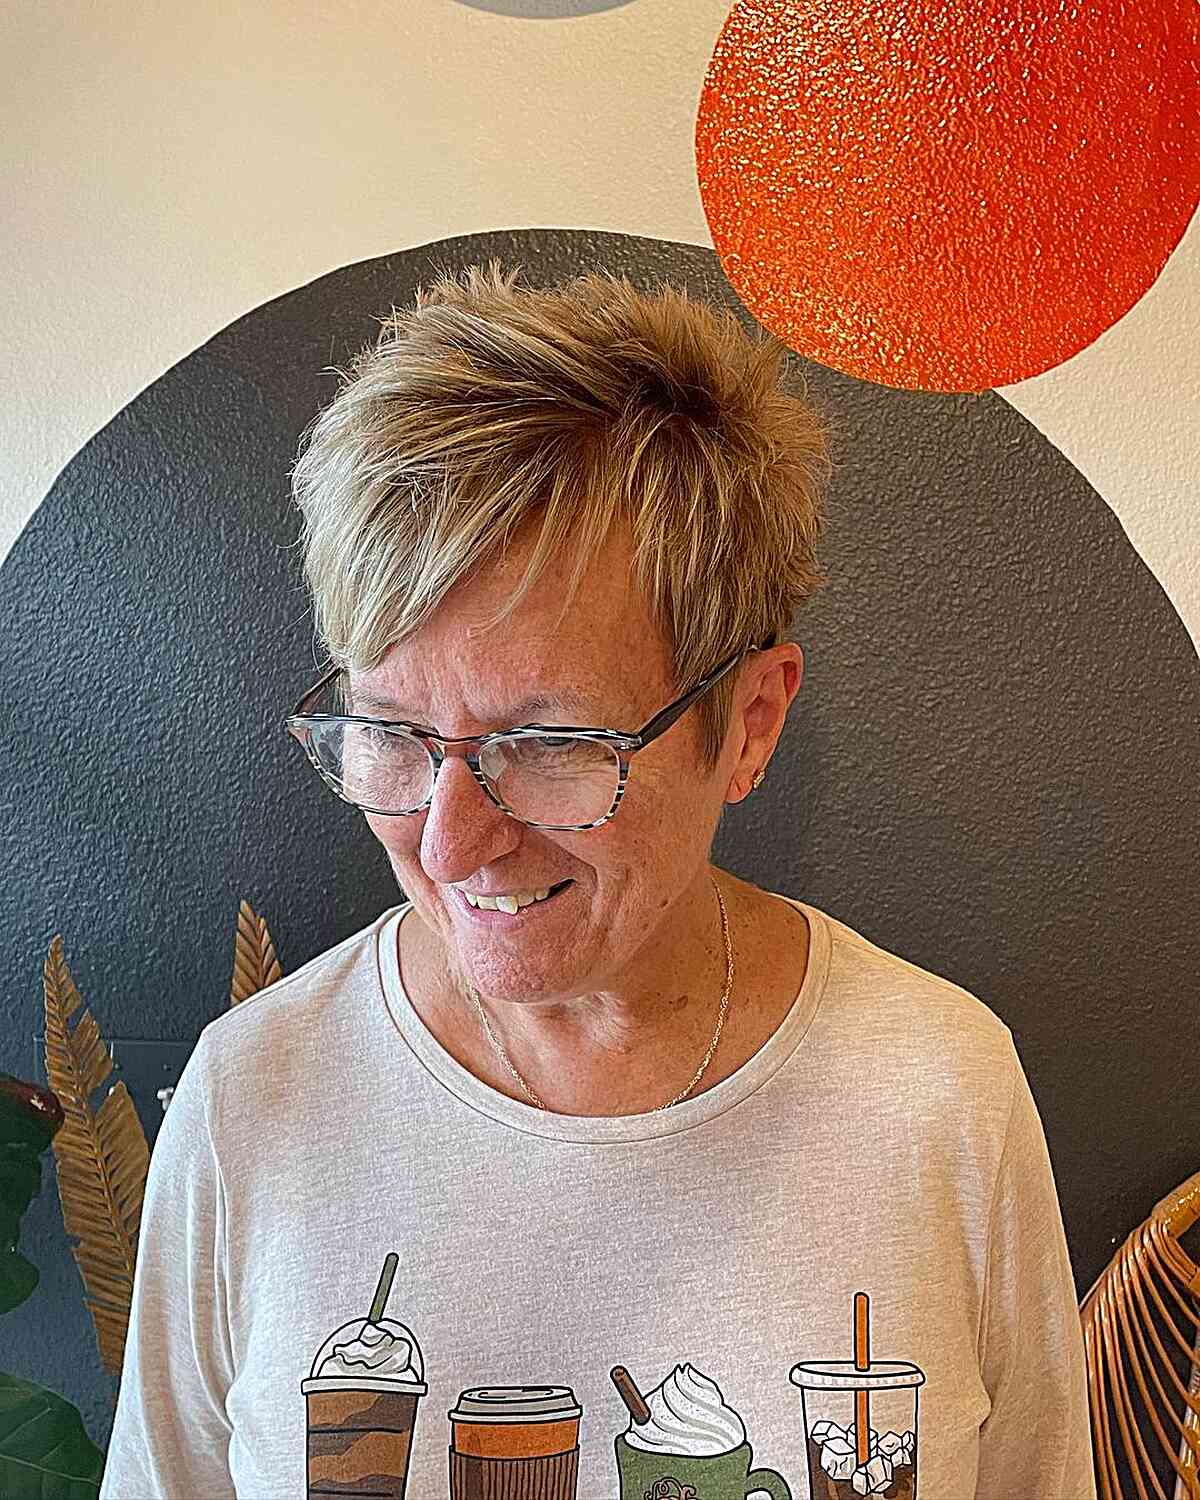 Spiky Edgy Short Pixie Hair with Side Fringe for 60-year-old Women with Glasses